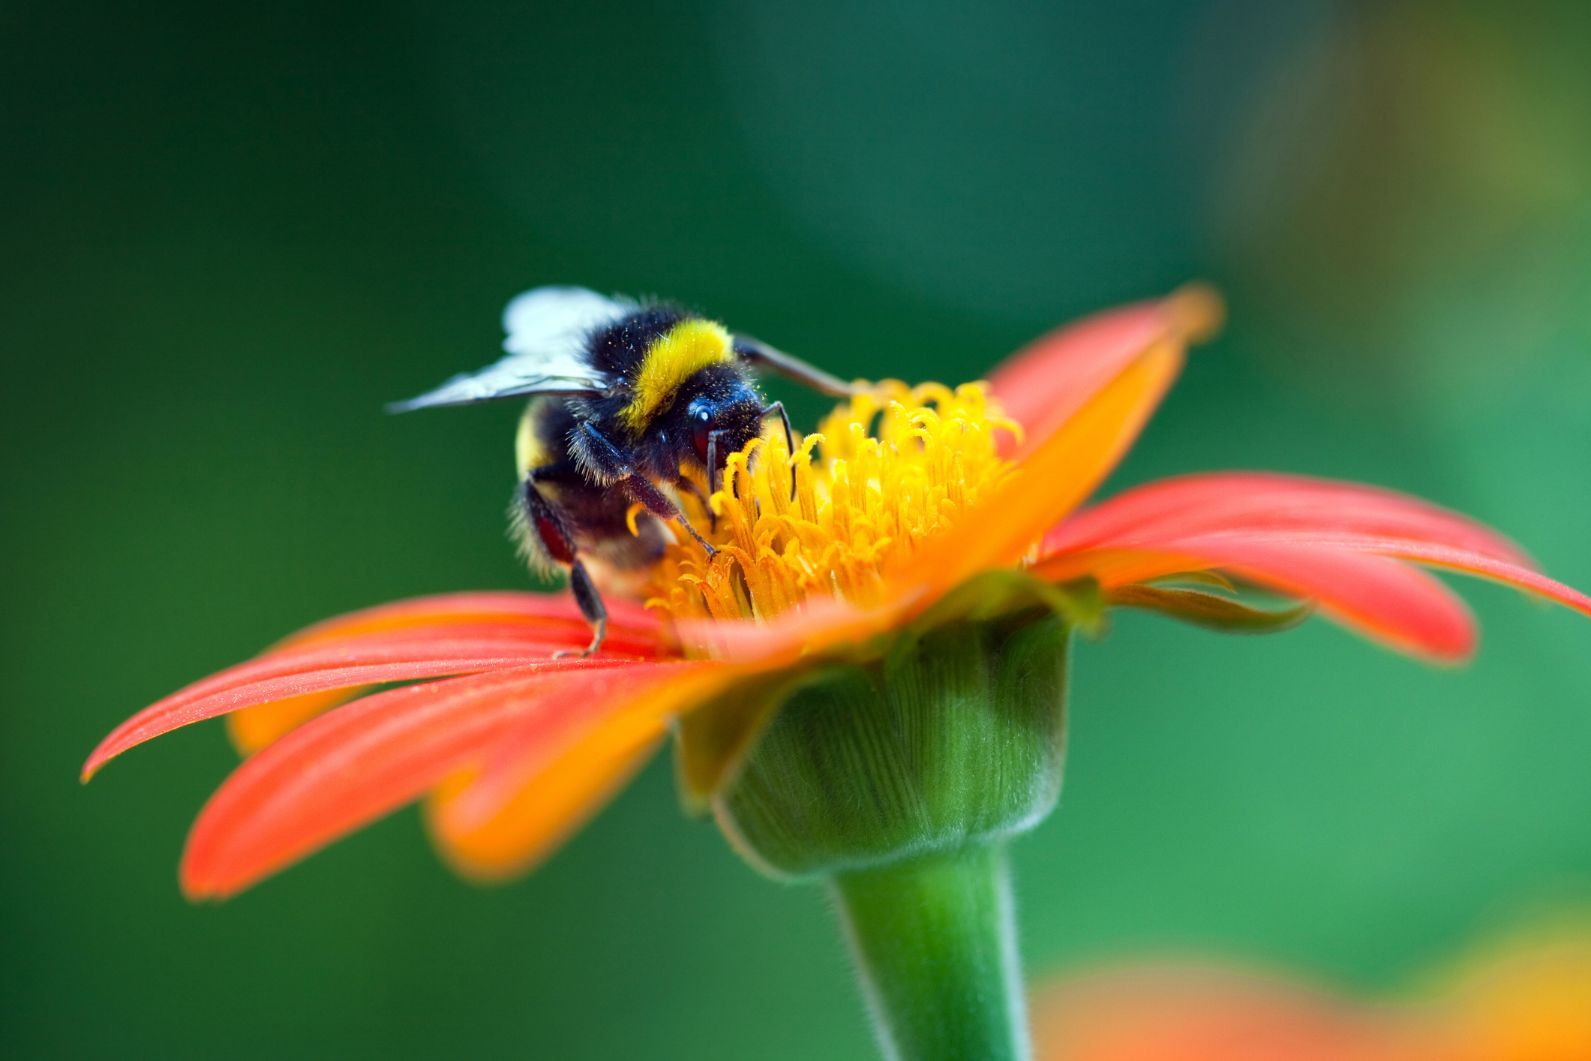 Bumblebees are excellent pollinators, making them a key part of our ecosystem. Photo: Getty